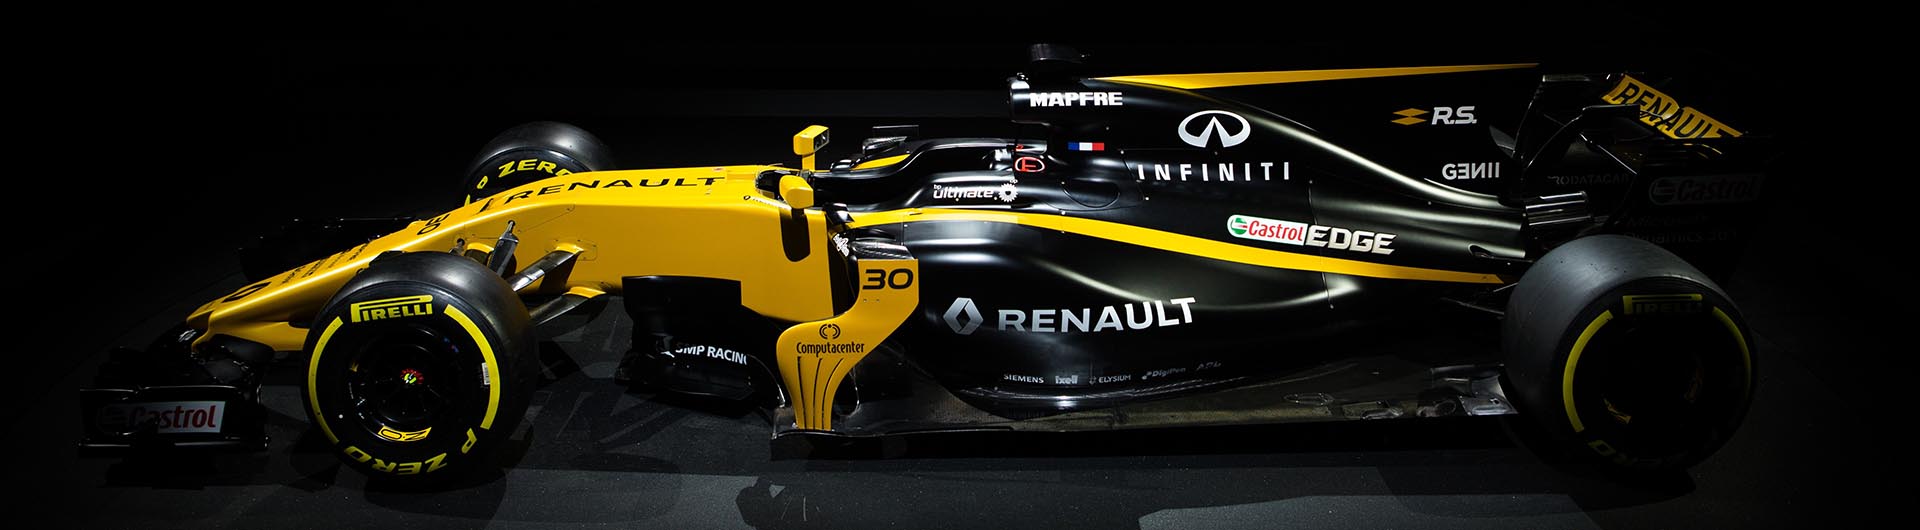 Renault R.S. 17